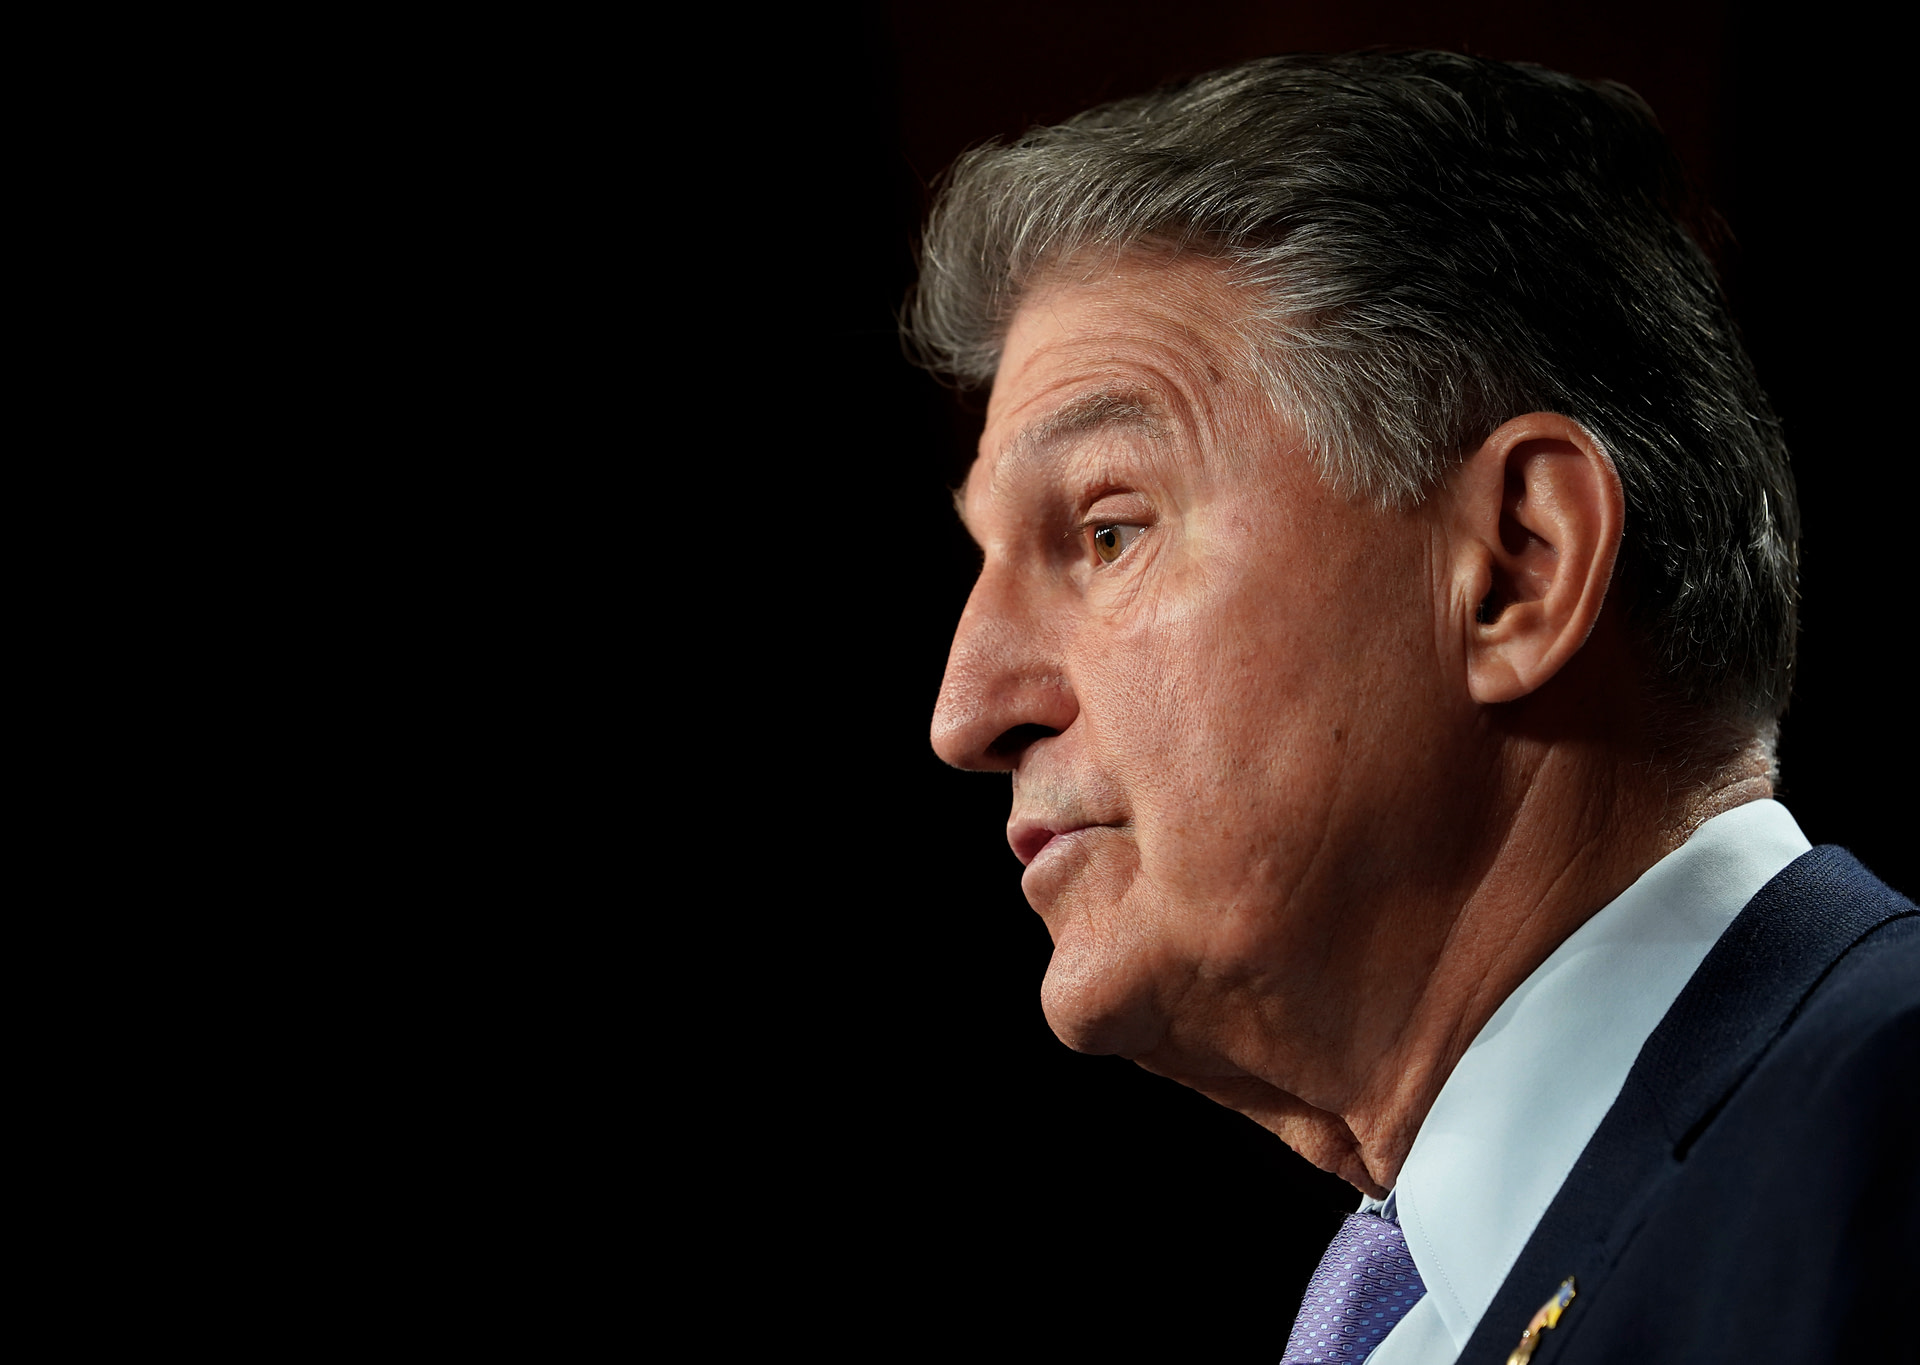 Senate moves forward to fund government despite snags over Manchin’s energy plan